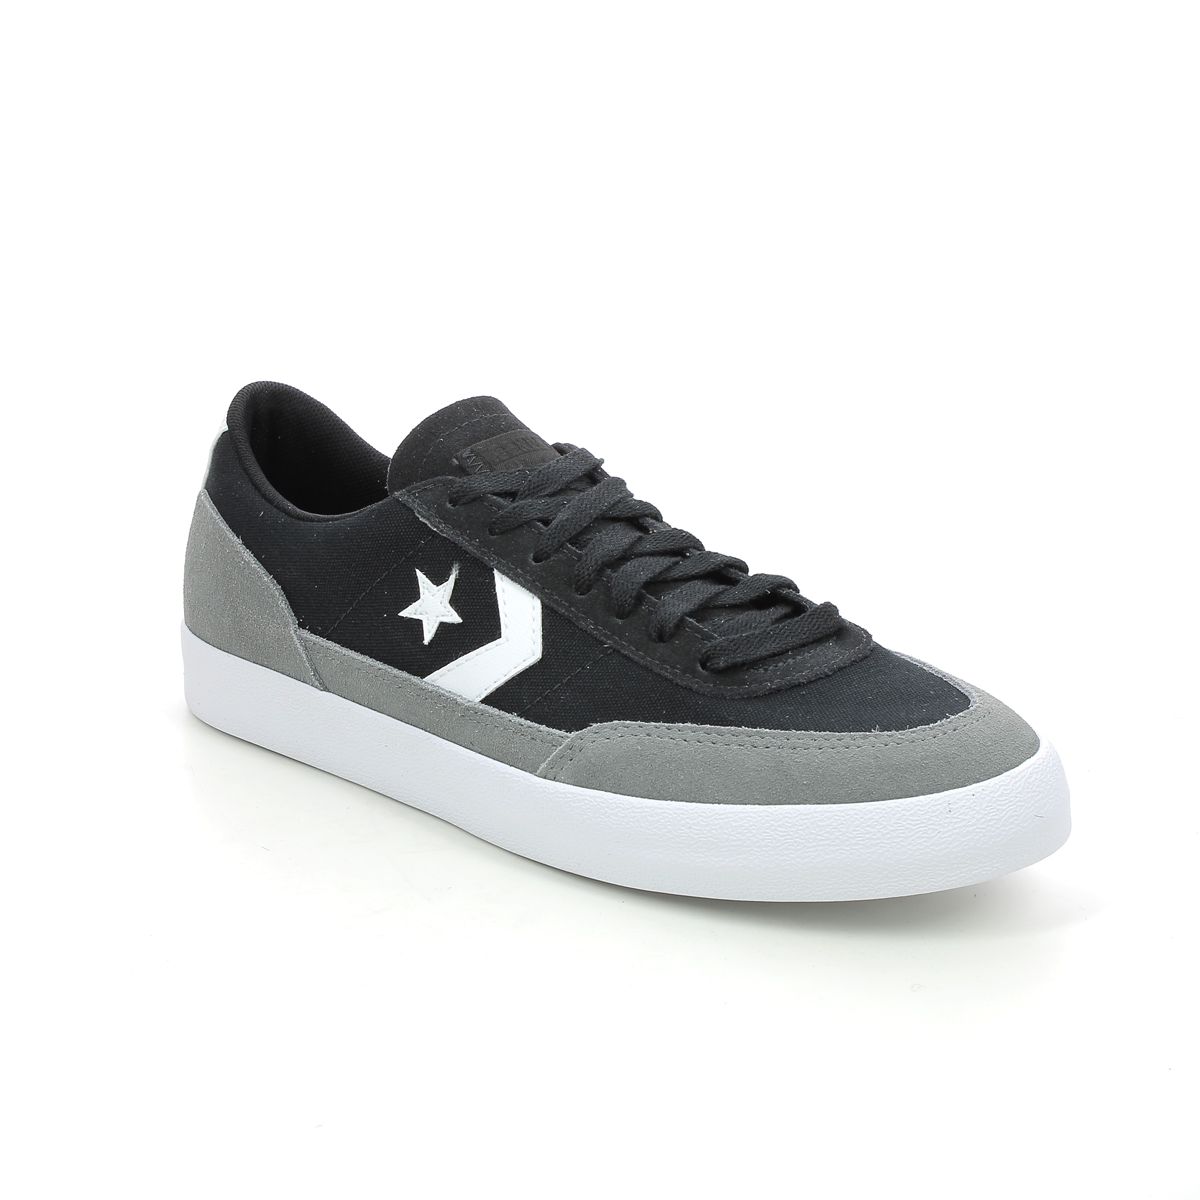 Converse Net Star Black grey Mens trainers 170715C-014 in a Plain  in Size 7